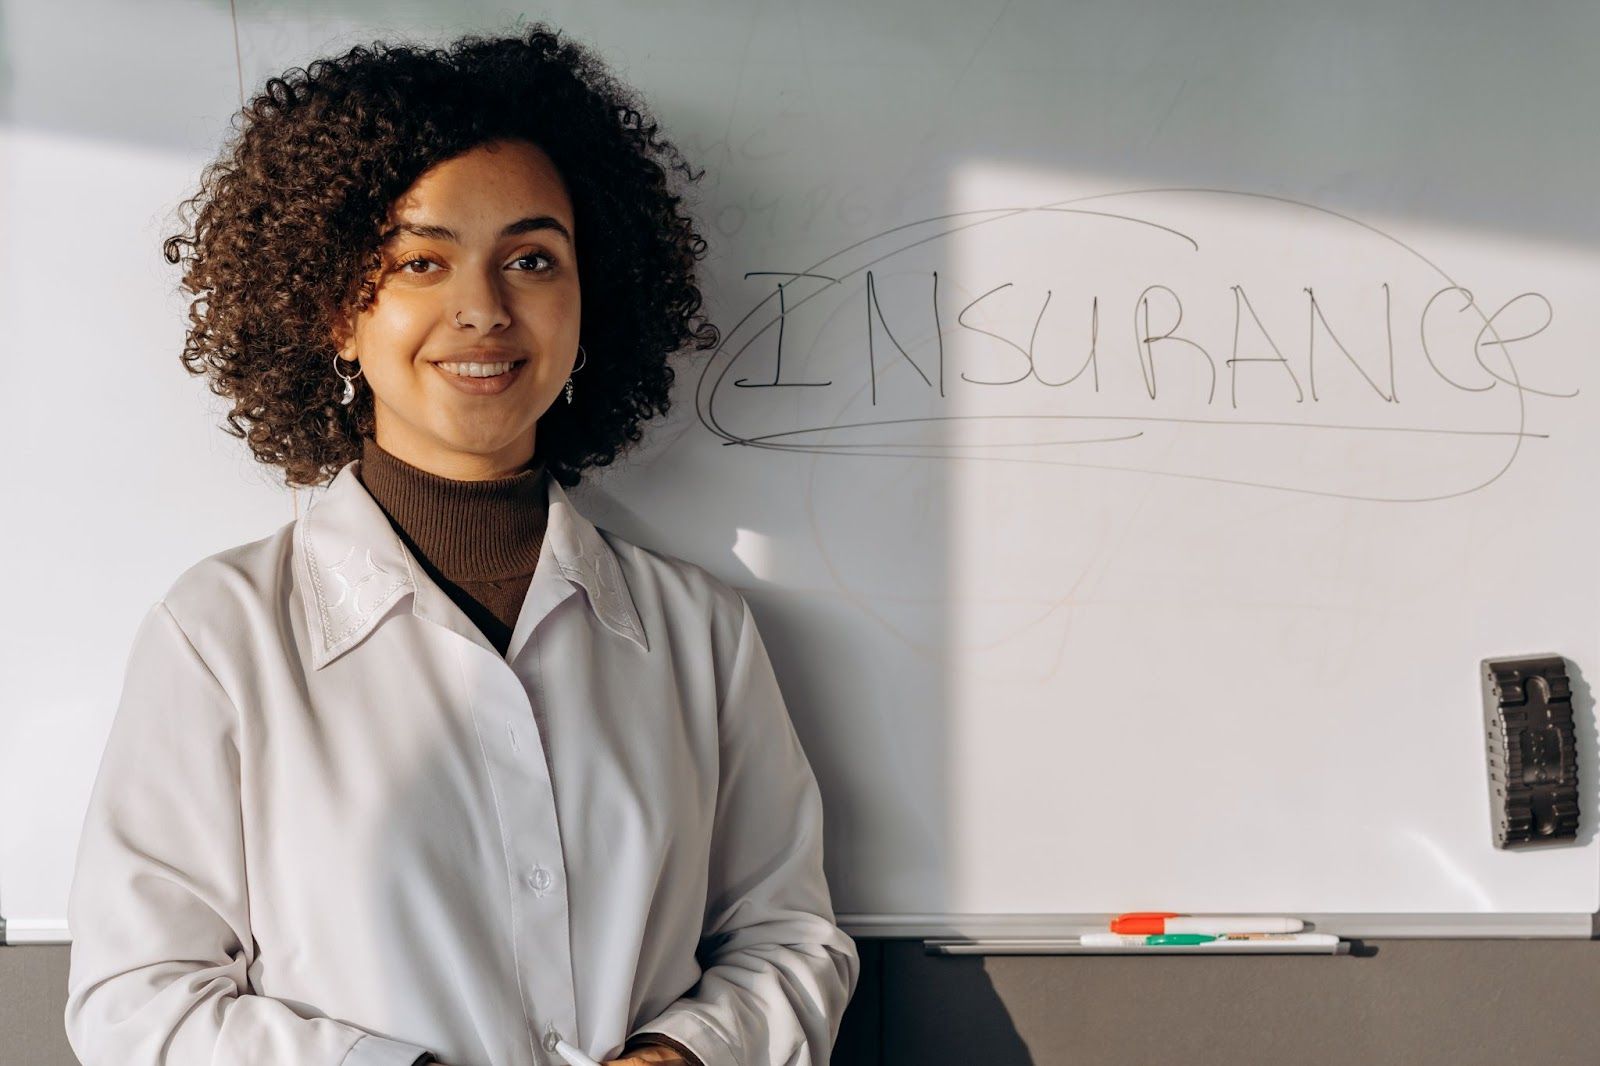 Insurance written on a whiteboard with a woman standing in front of it.